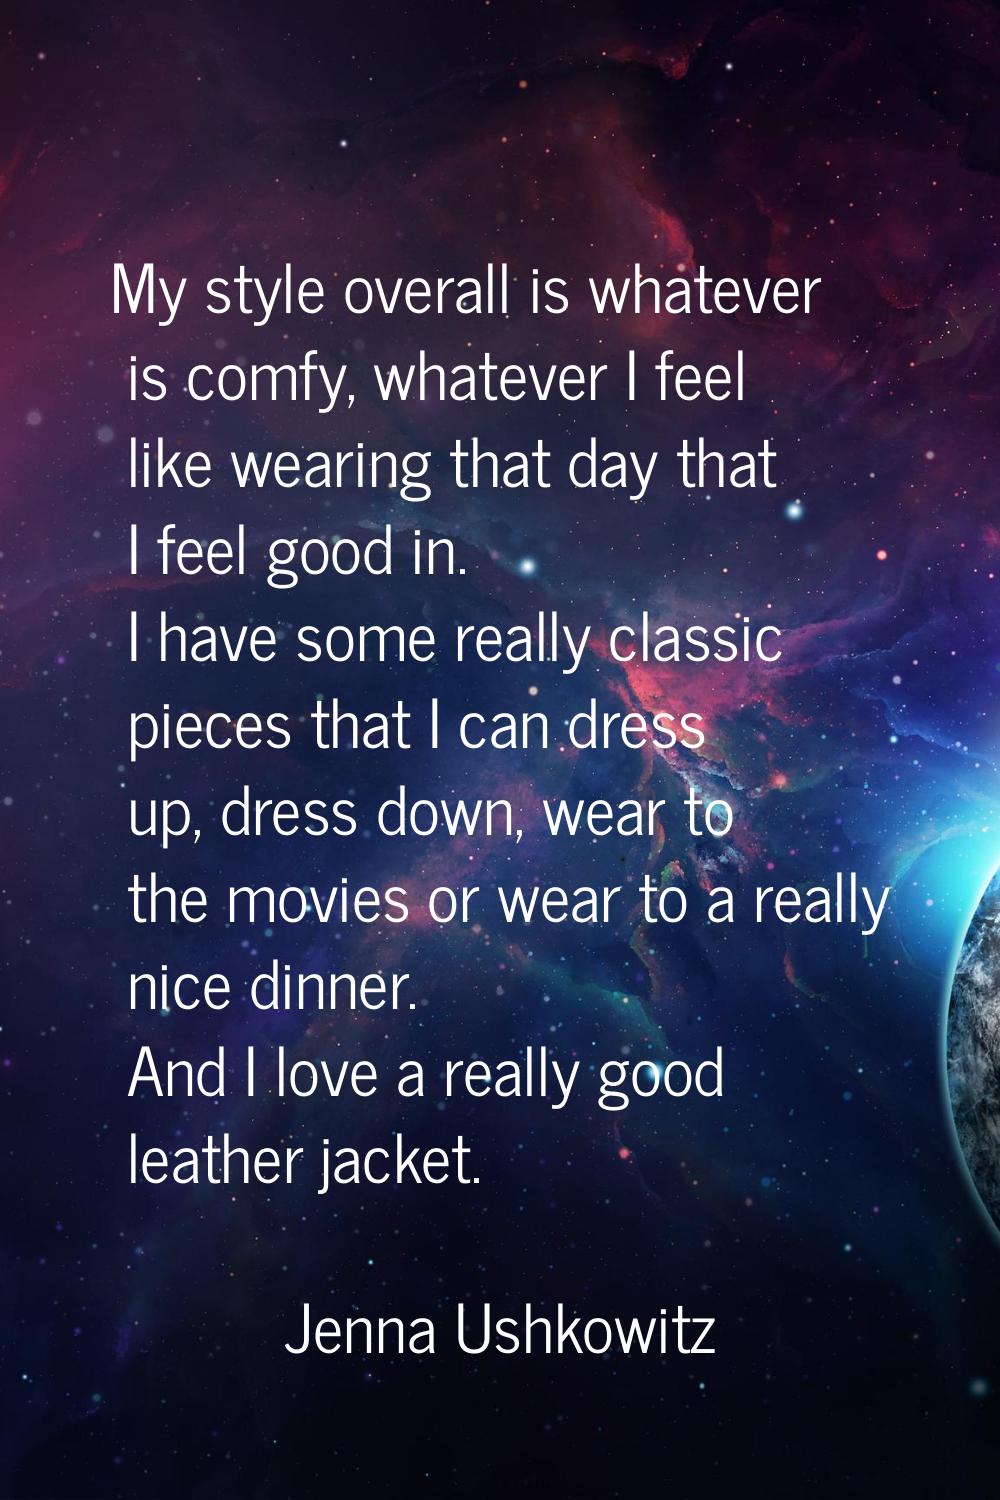 My style overall is whatever is comfy, whatever I feel like wearing that day that I feel good in. I